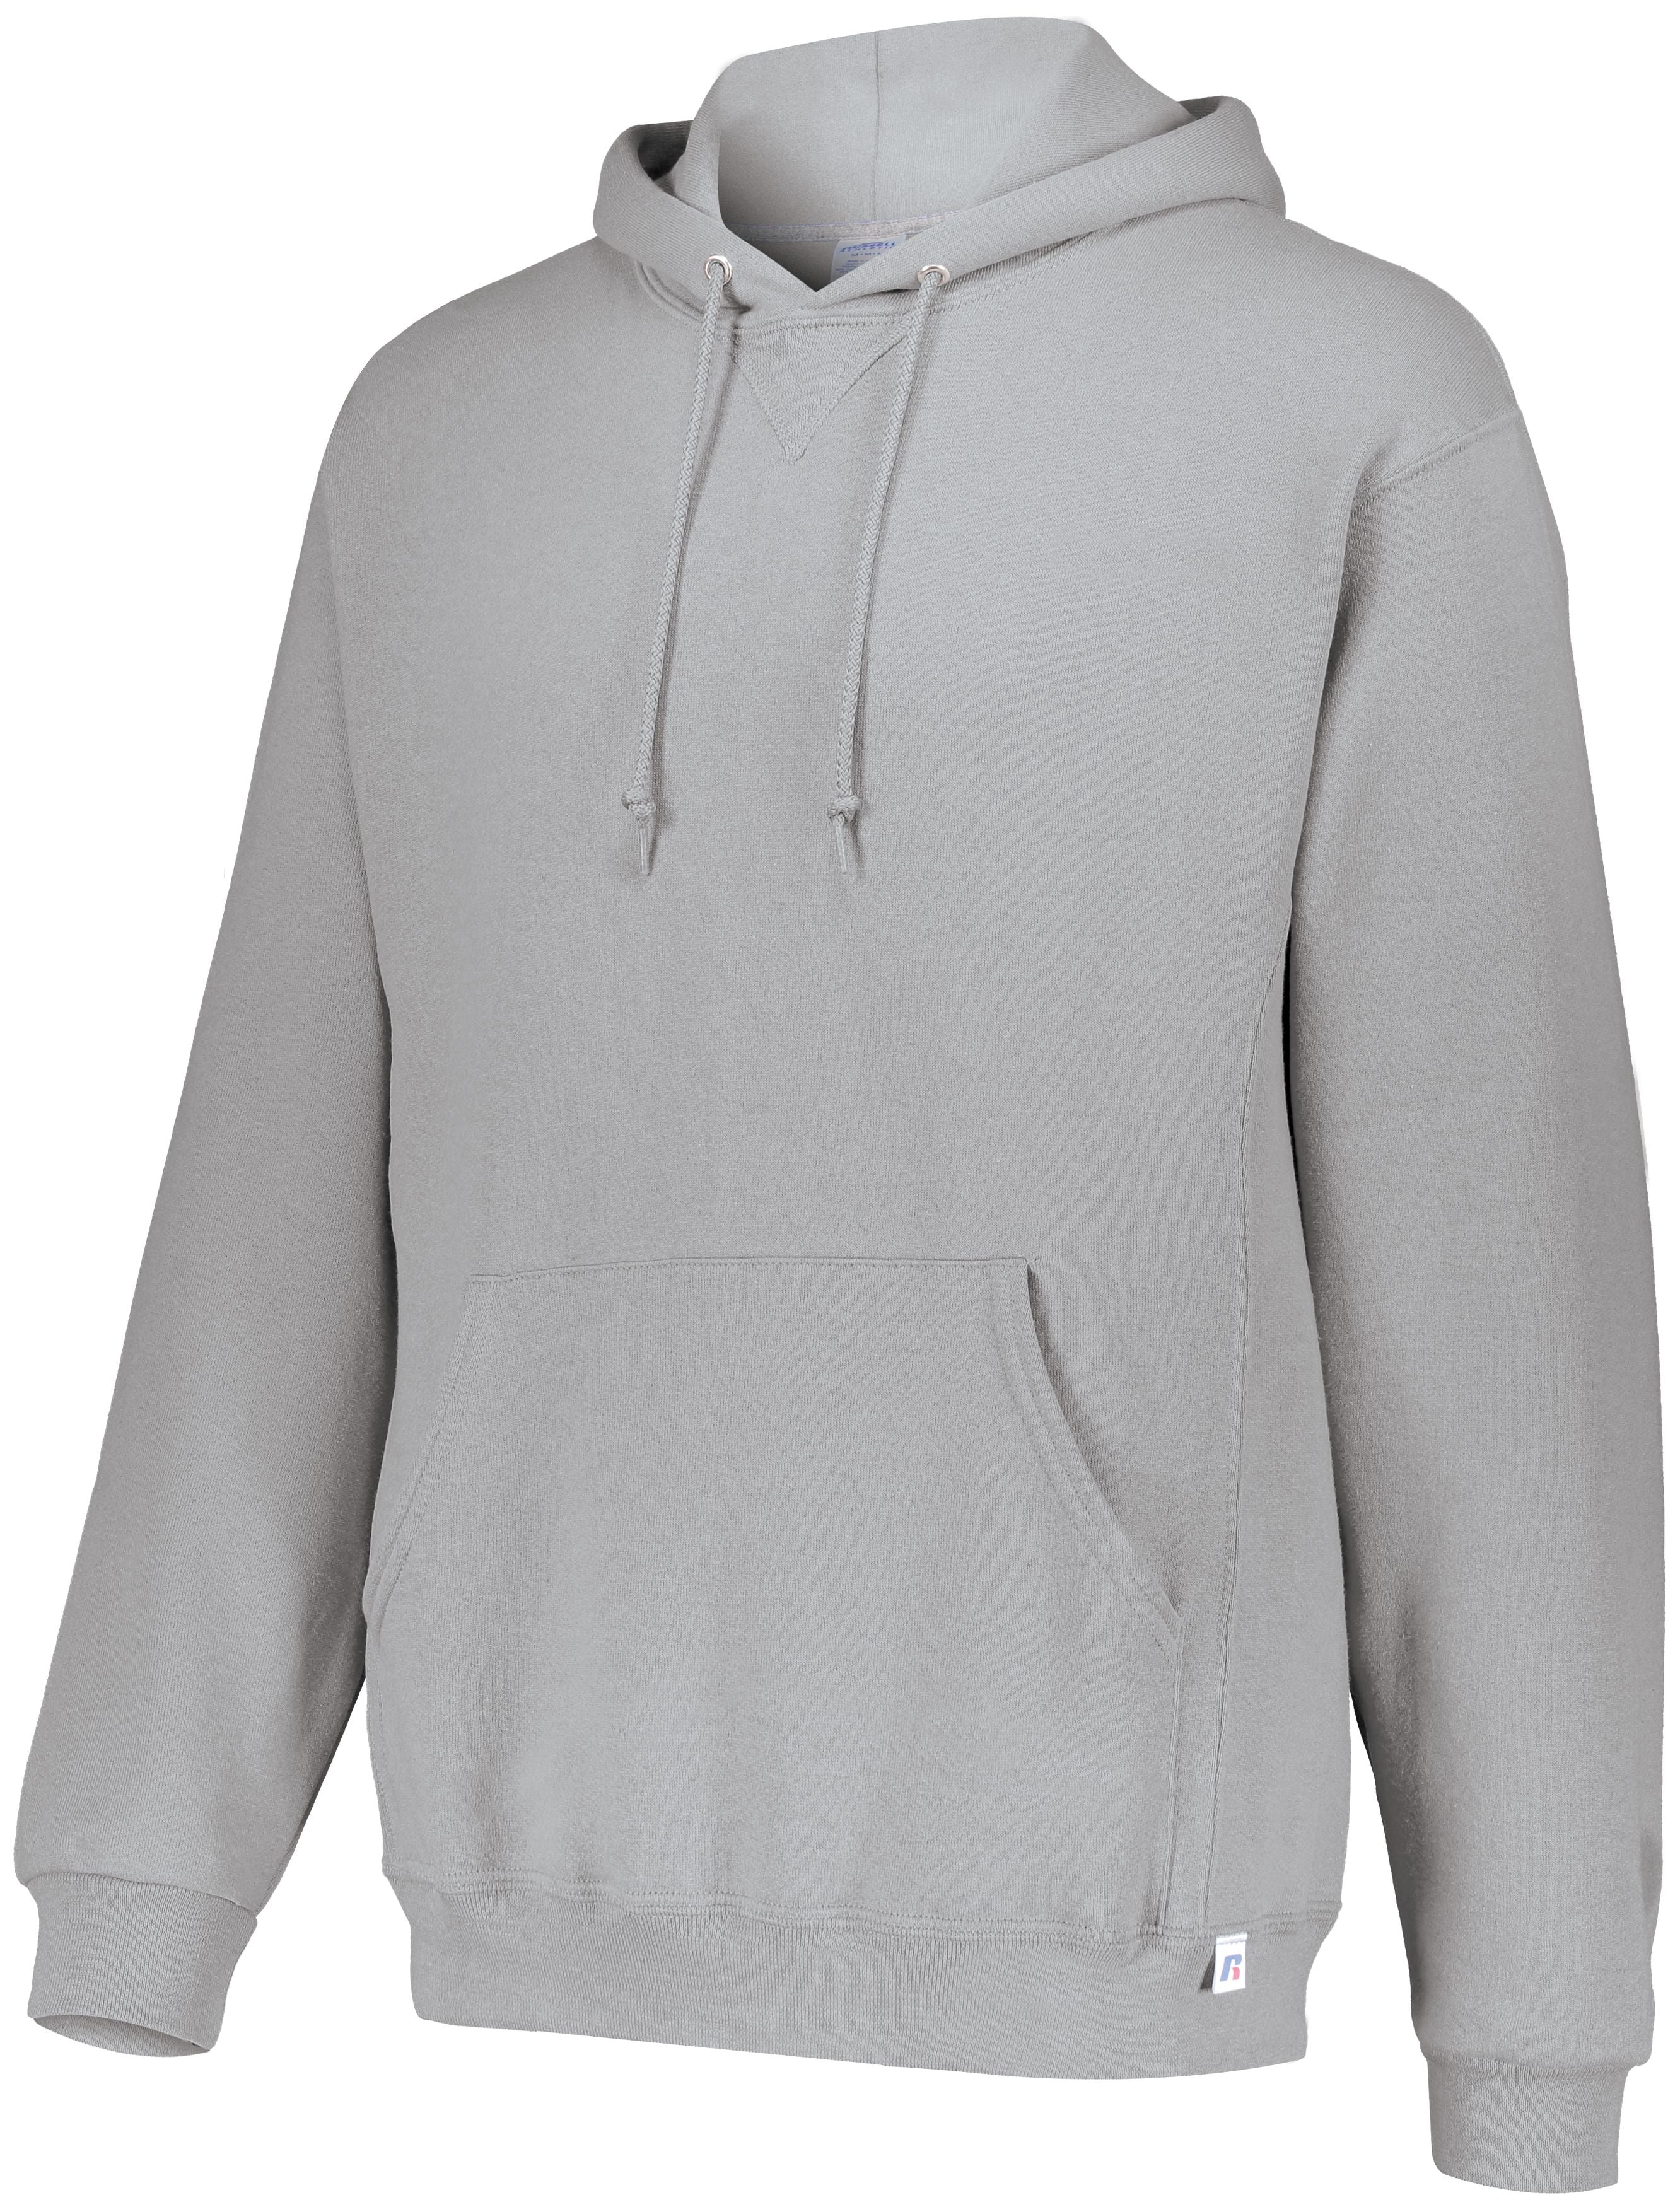 Russell Athletic Dri-Power Fleece Hoodie in Oxford  -Part of the Adult, Russell-Athletic-Products, Shirts product lines at KanaleyCreations.com